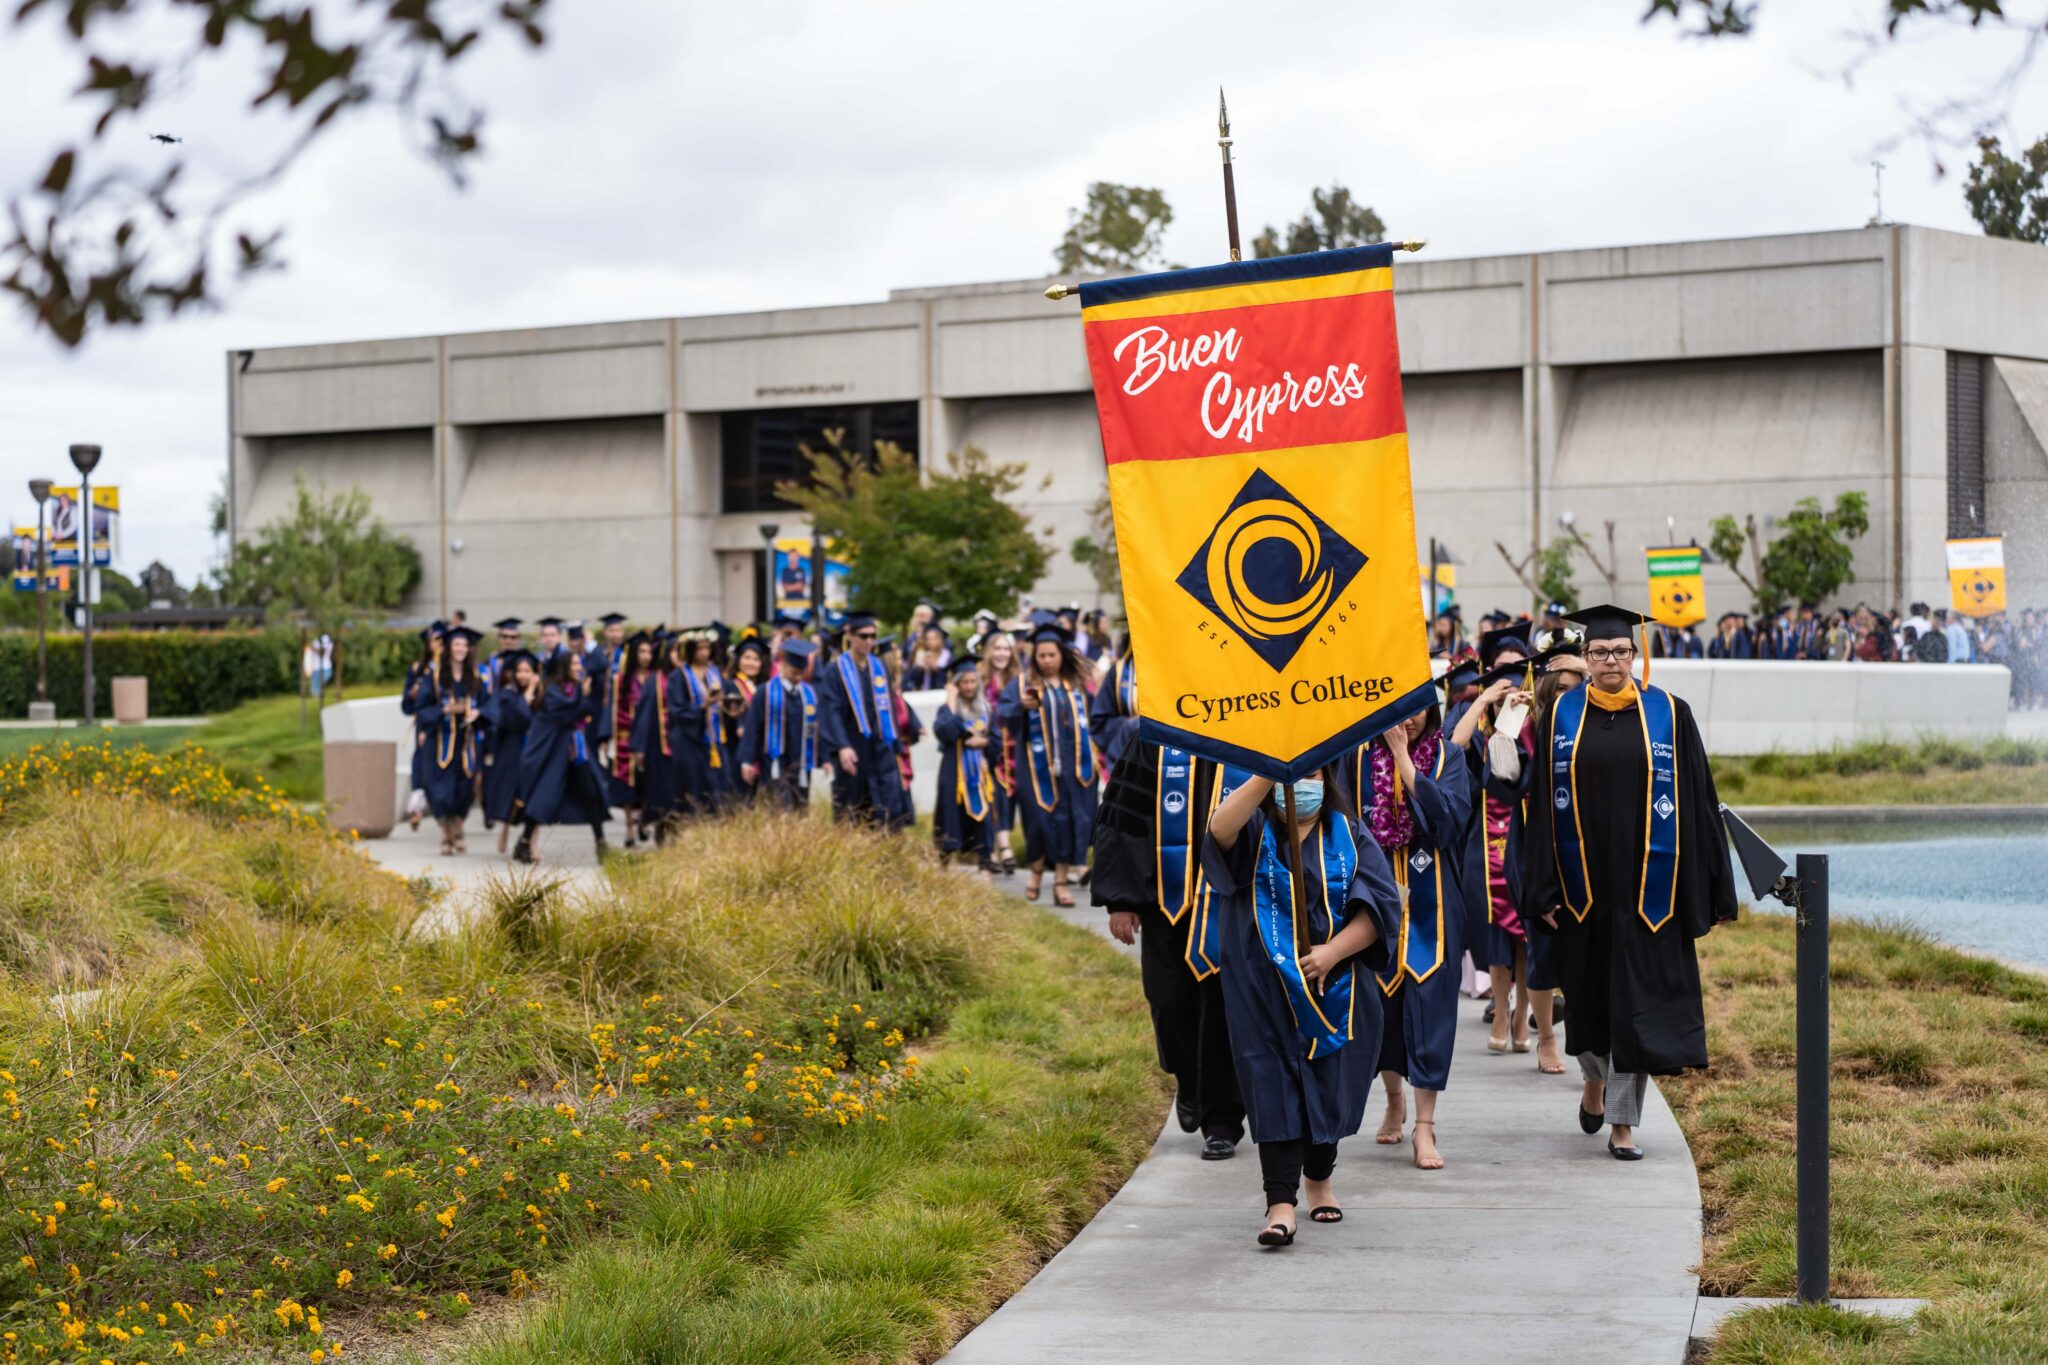 Graduating students walking along path lined with grass near the pond. The person in front is holding a flag that says Buen Cypress and has the Cypress College logo